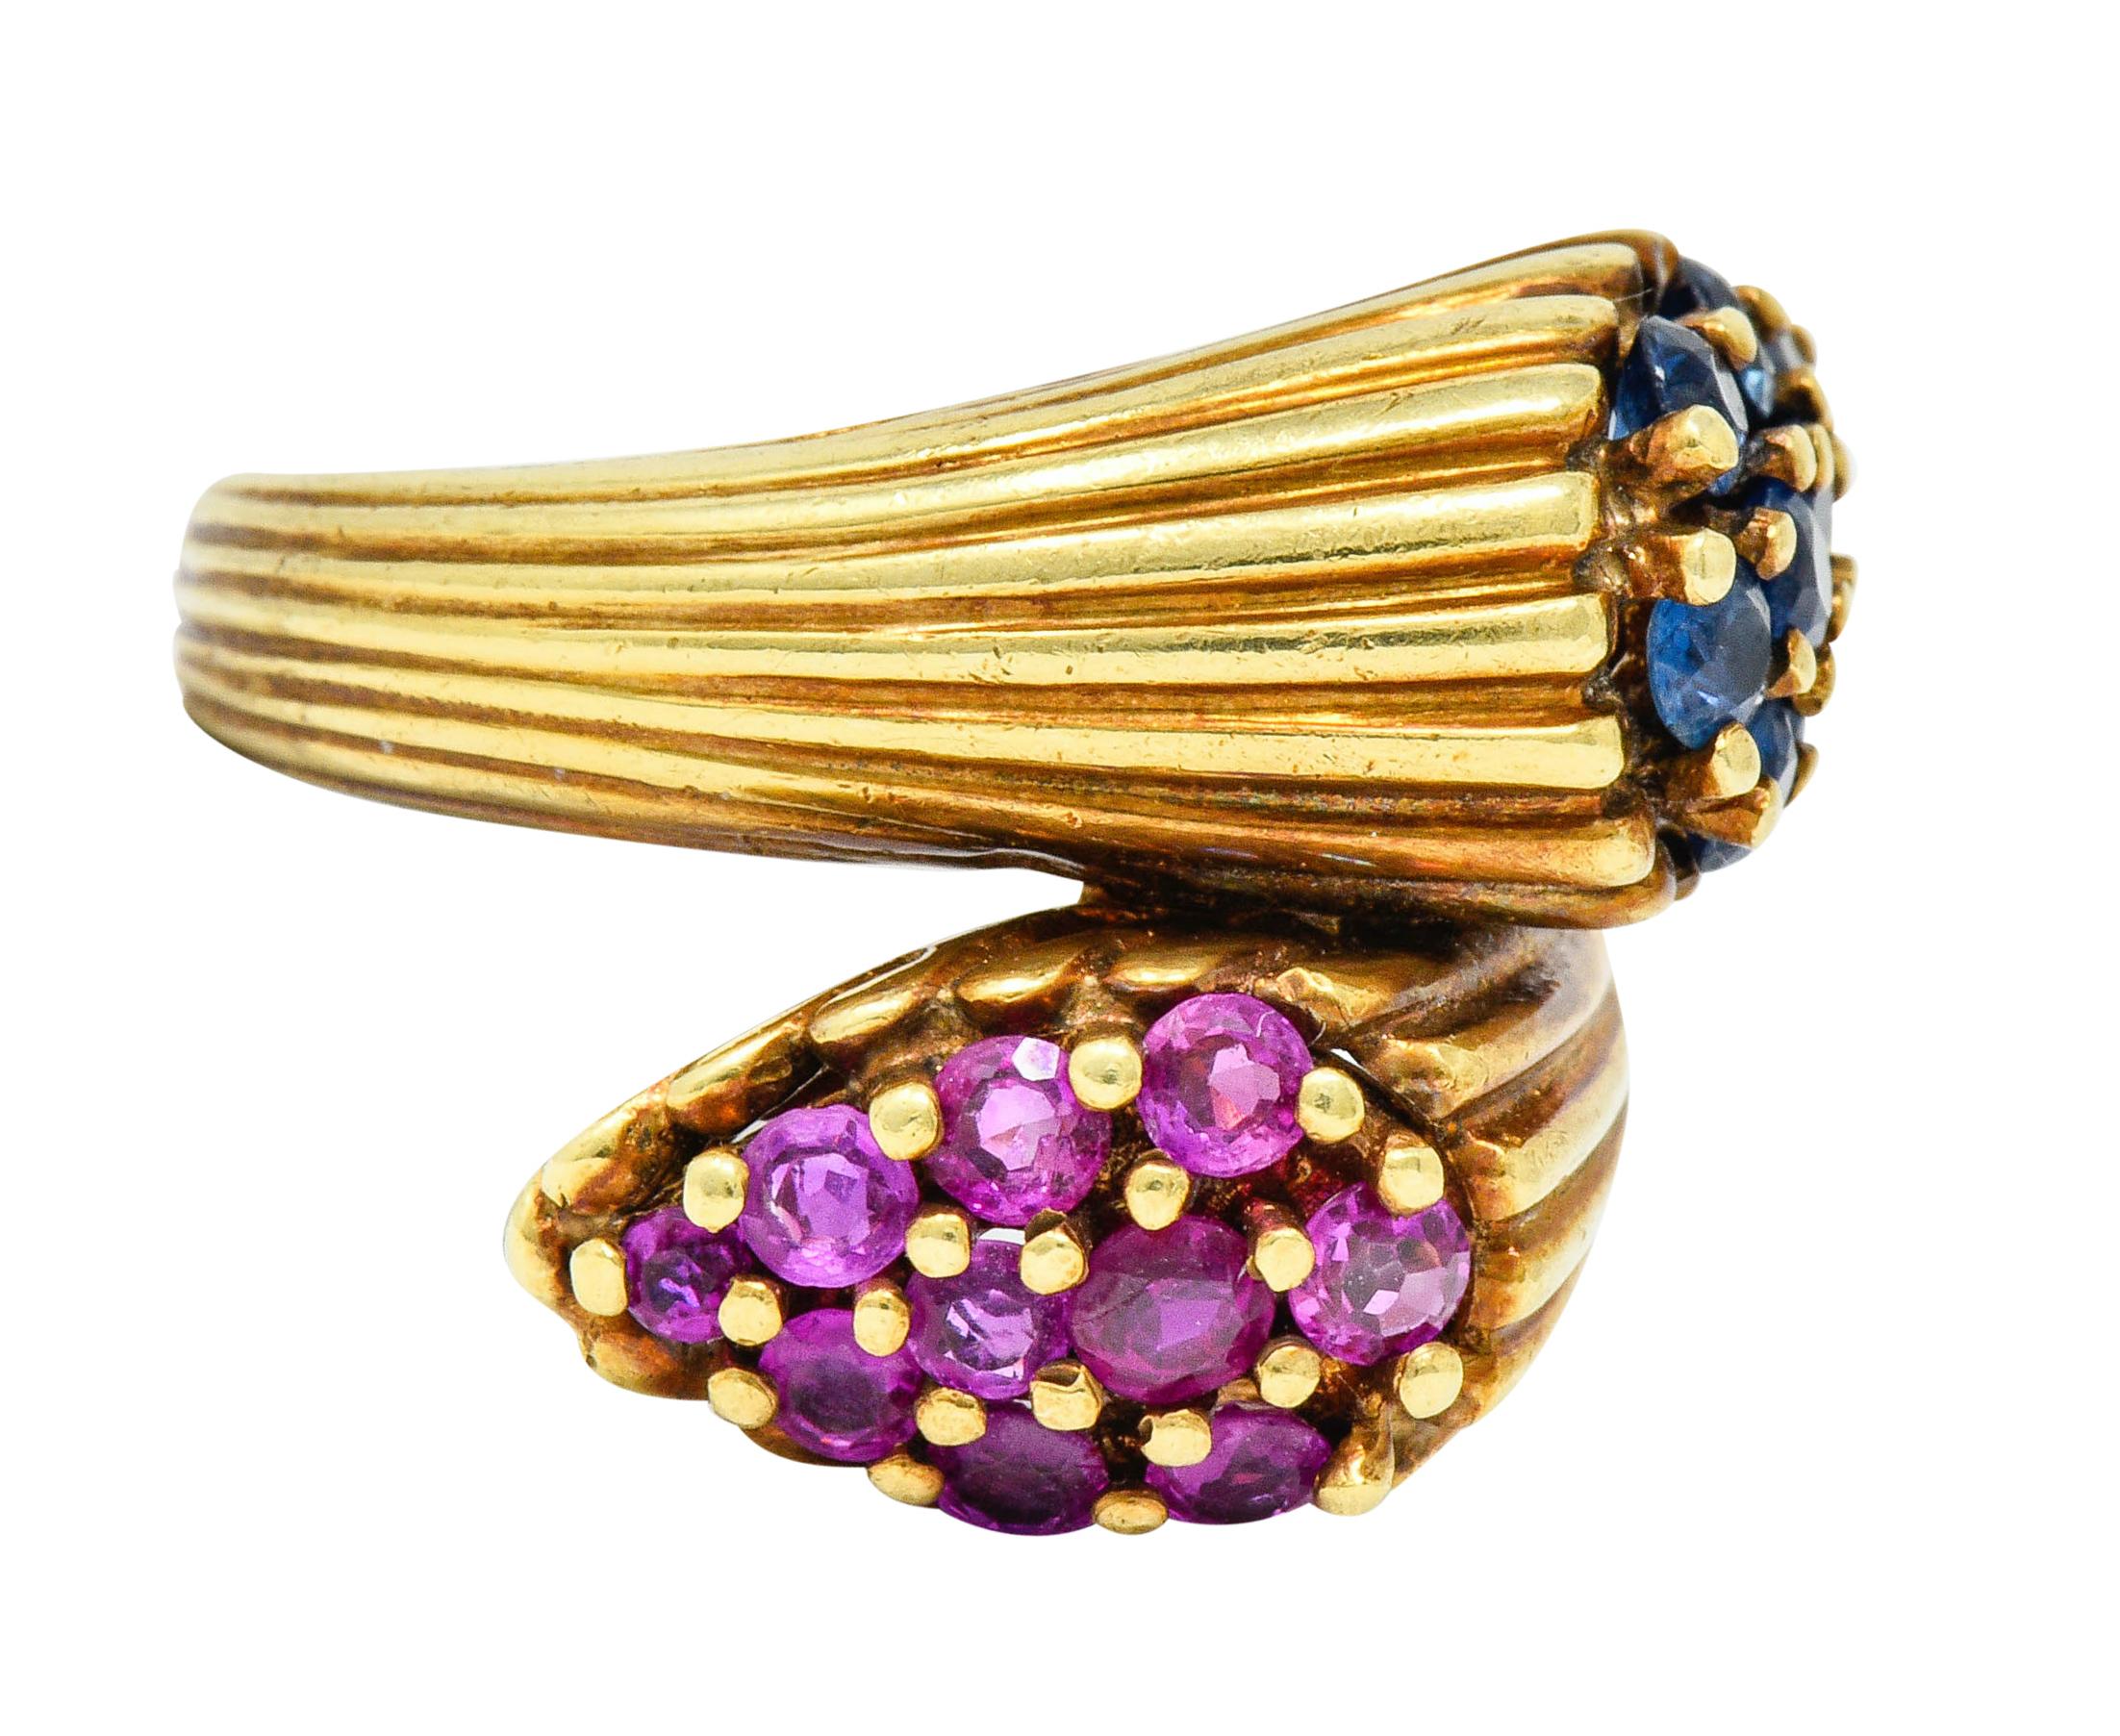 Bypass style ring is designed with a deeply fluted shank

That terminates as two pear shaped forms, nestled beside each other

Pavè set with round cut sapphires and rubies weighing in total approximately 1.82 carats

With medium-dark blue to blue